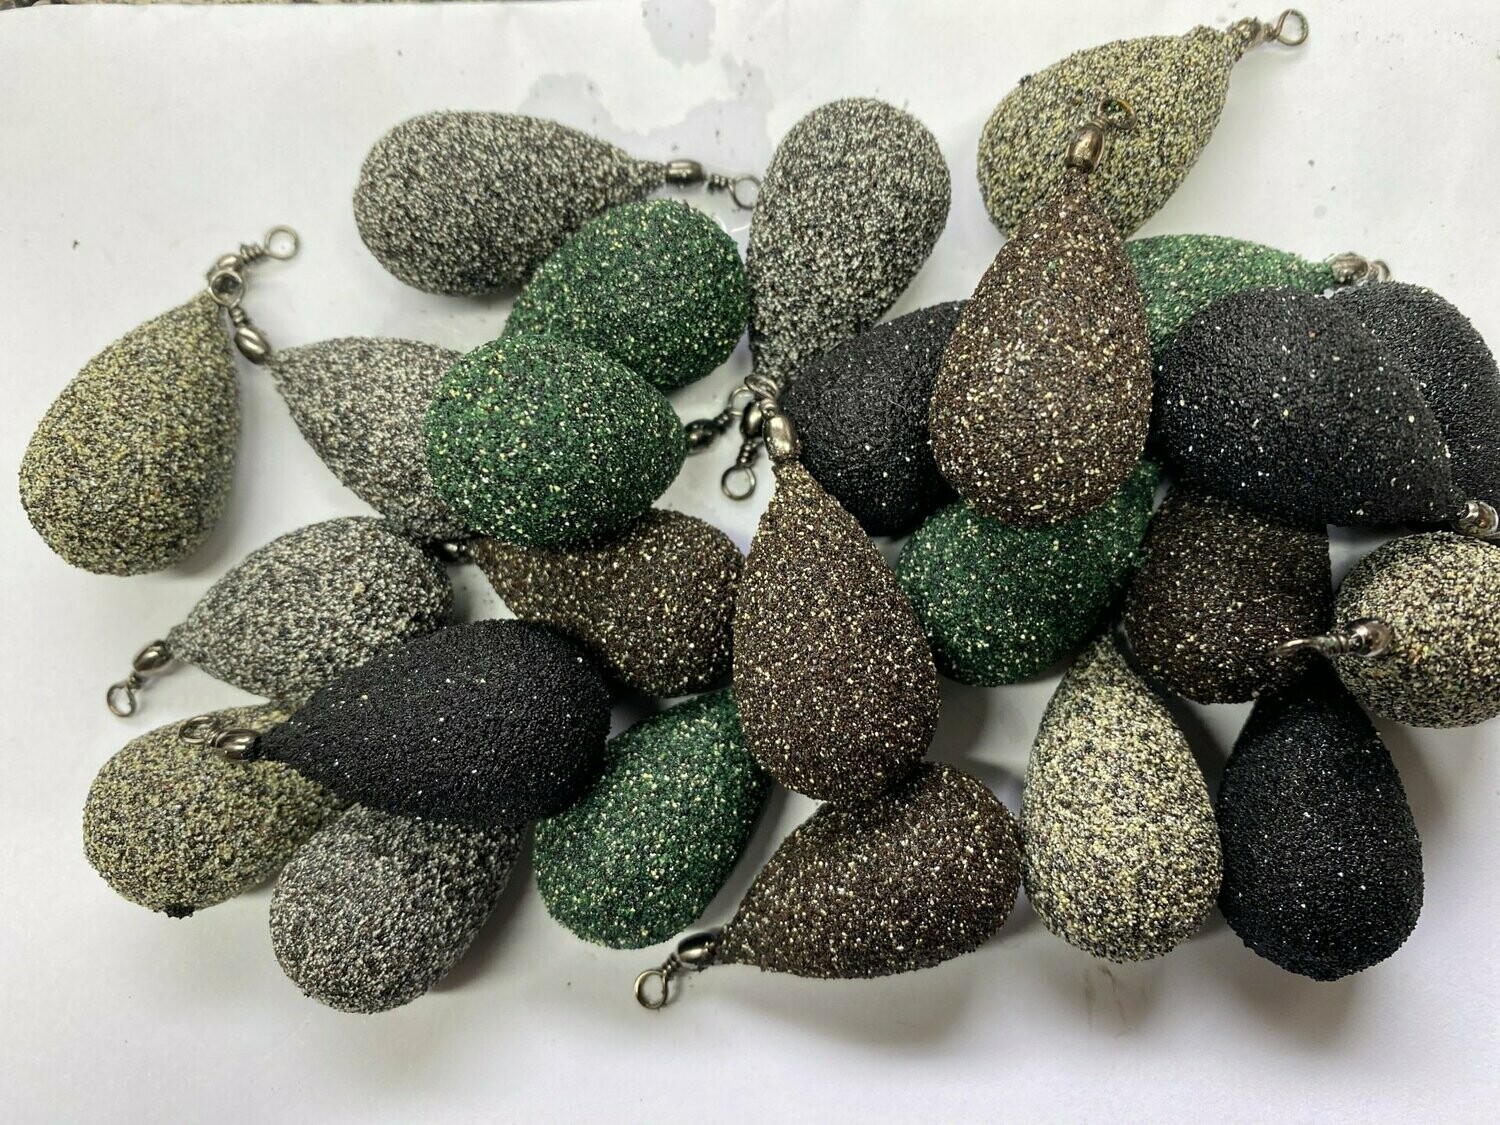 2 oz. Pears fitted with barrel swivels LEAD WEIGHTS SINKERS